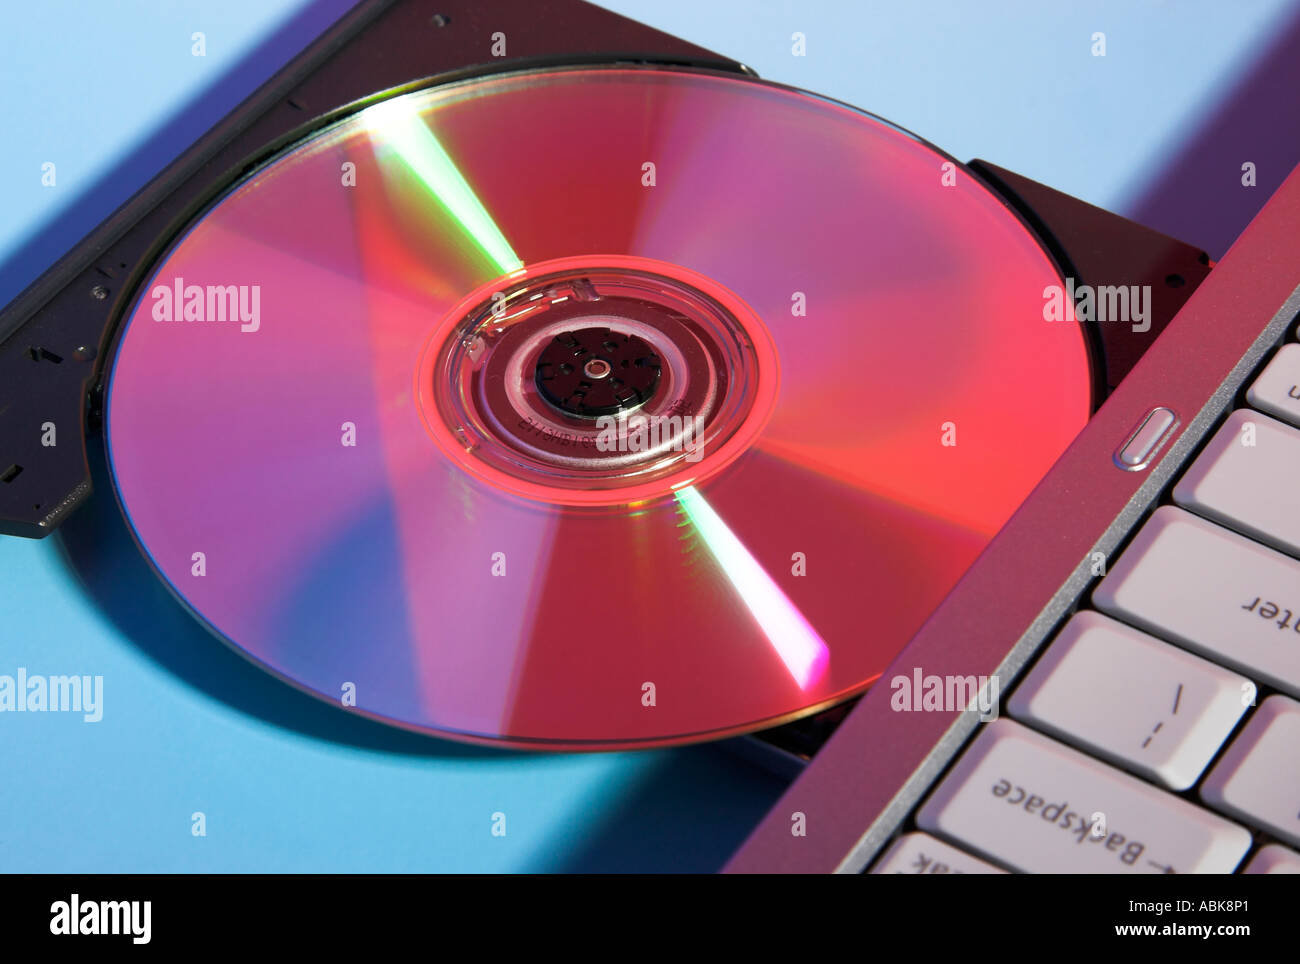 An opened CD drive tray Stock Photo